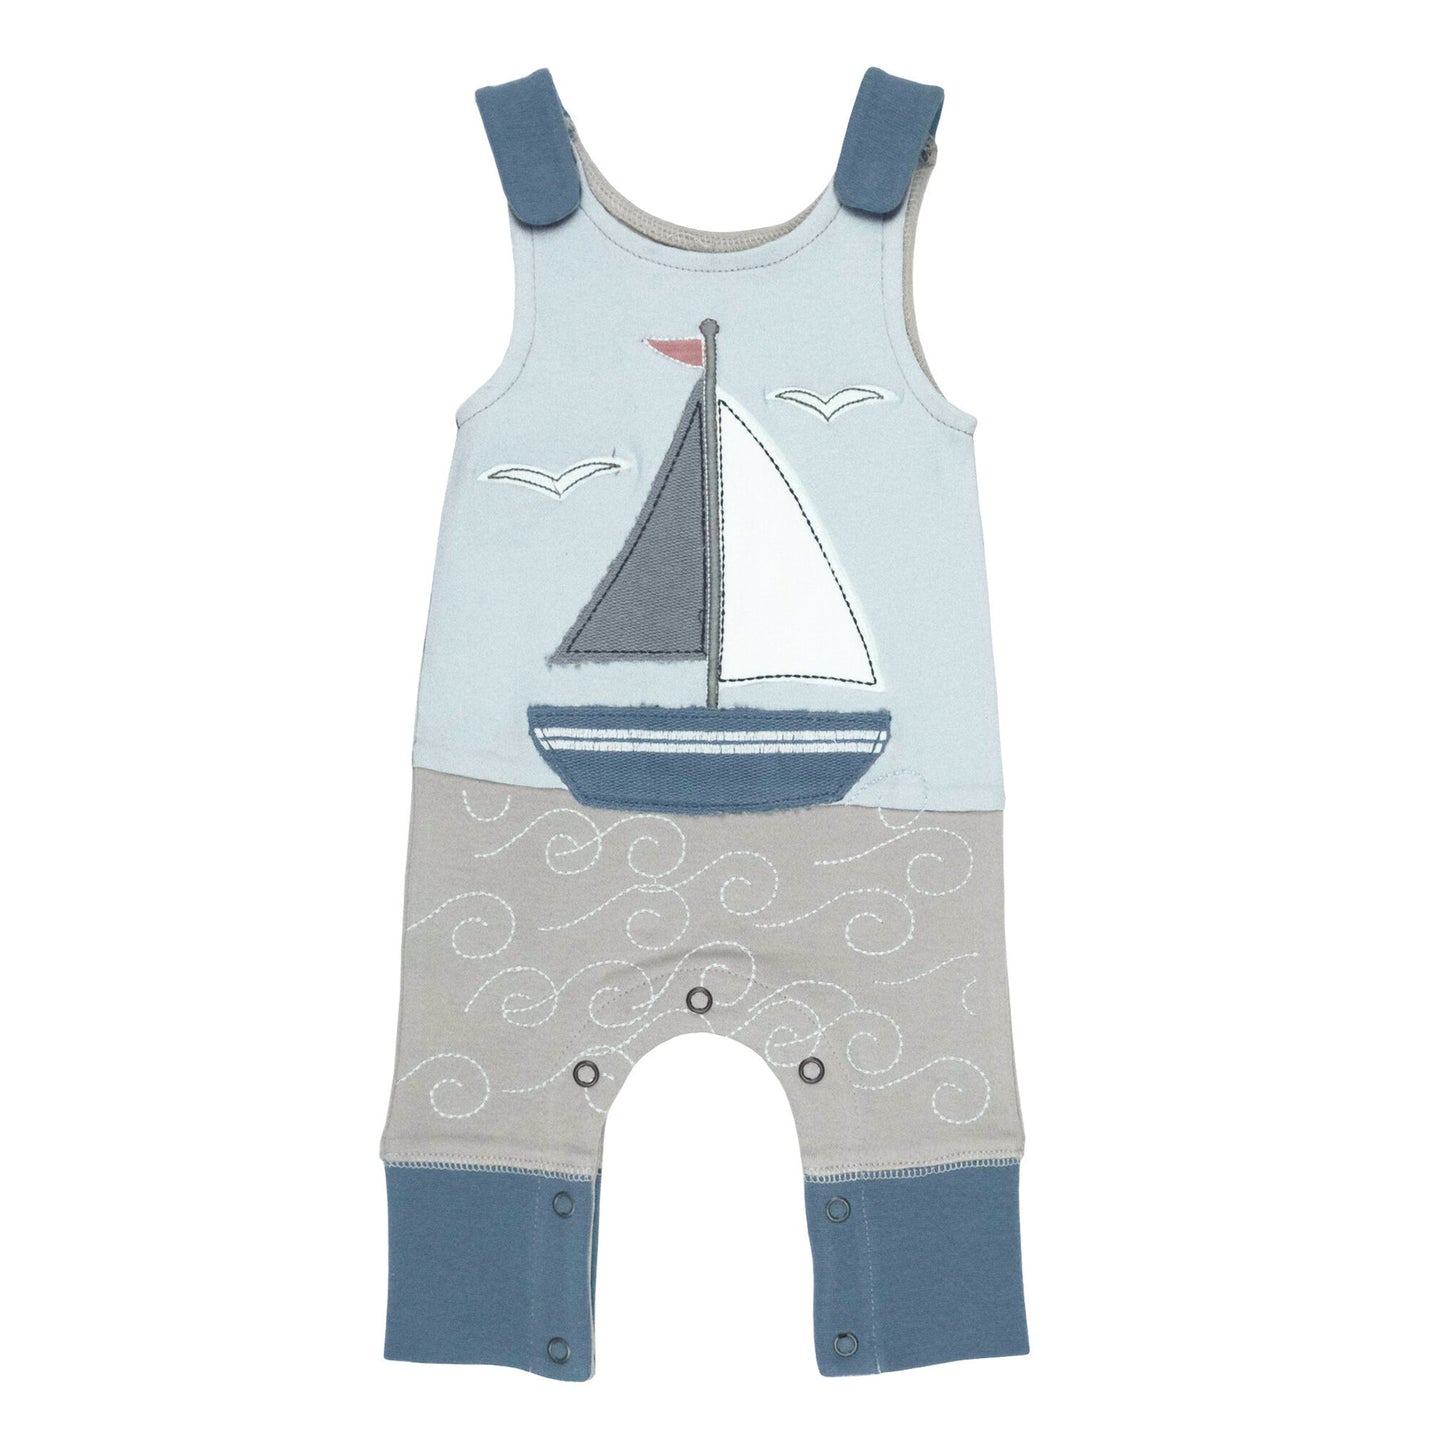 L'oved Baby Sailboat Romper